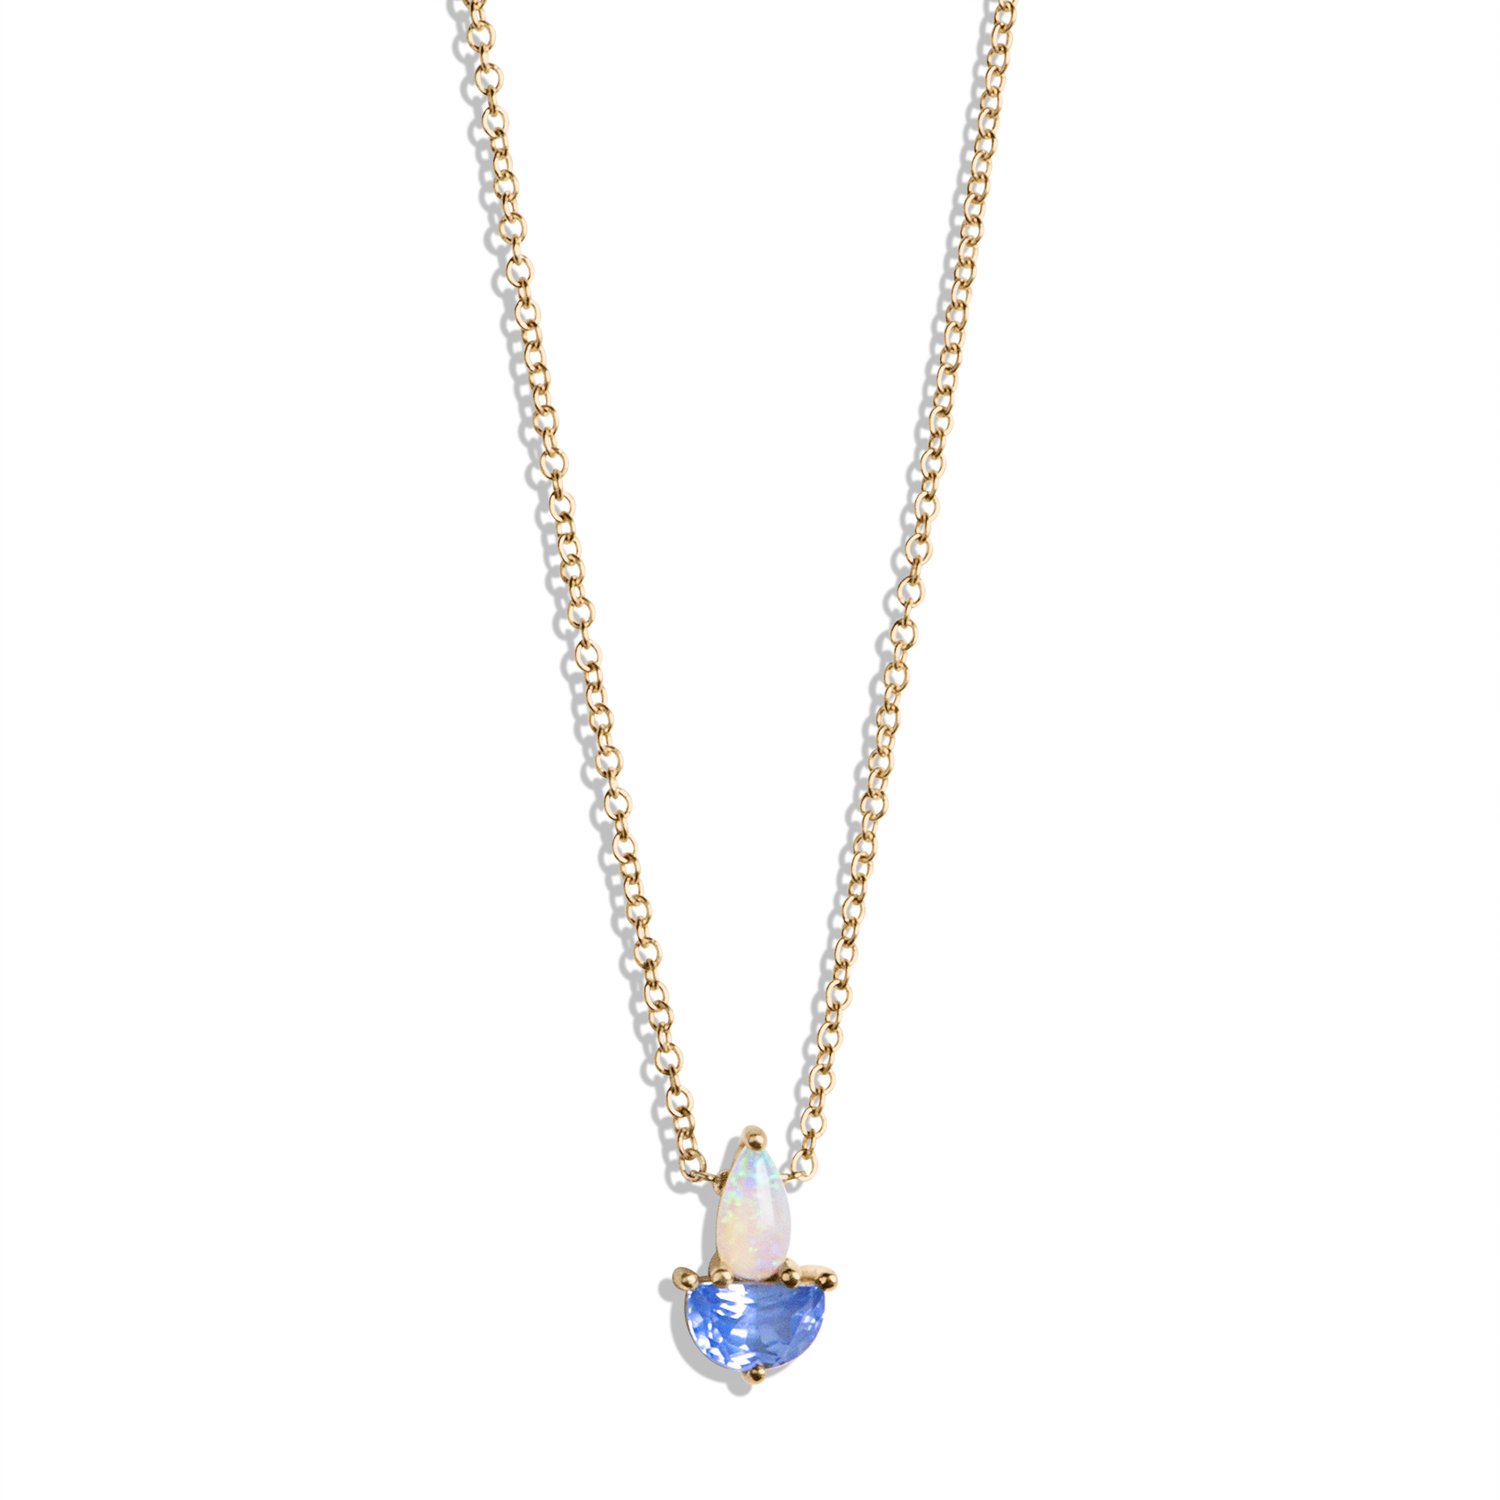 Hexagon crystal pendant necklace ladies jewelry opal natural stone pendant  long chain ladies necklace | Wish